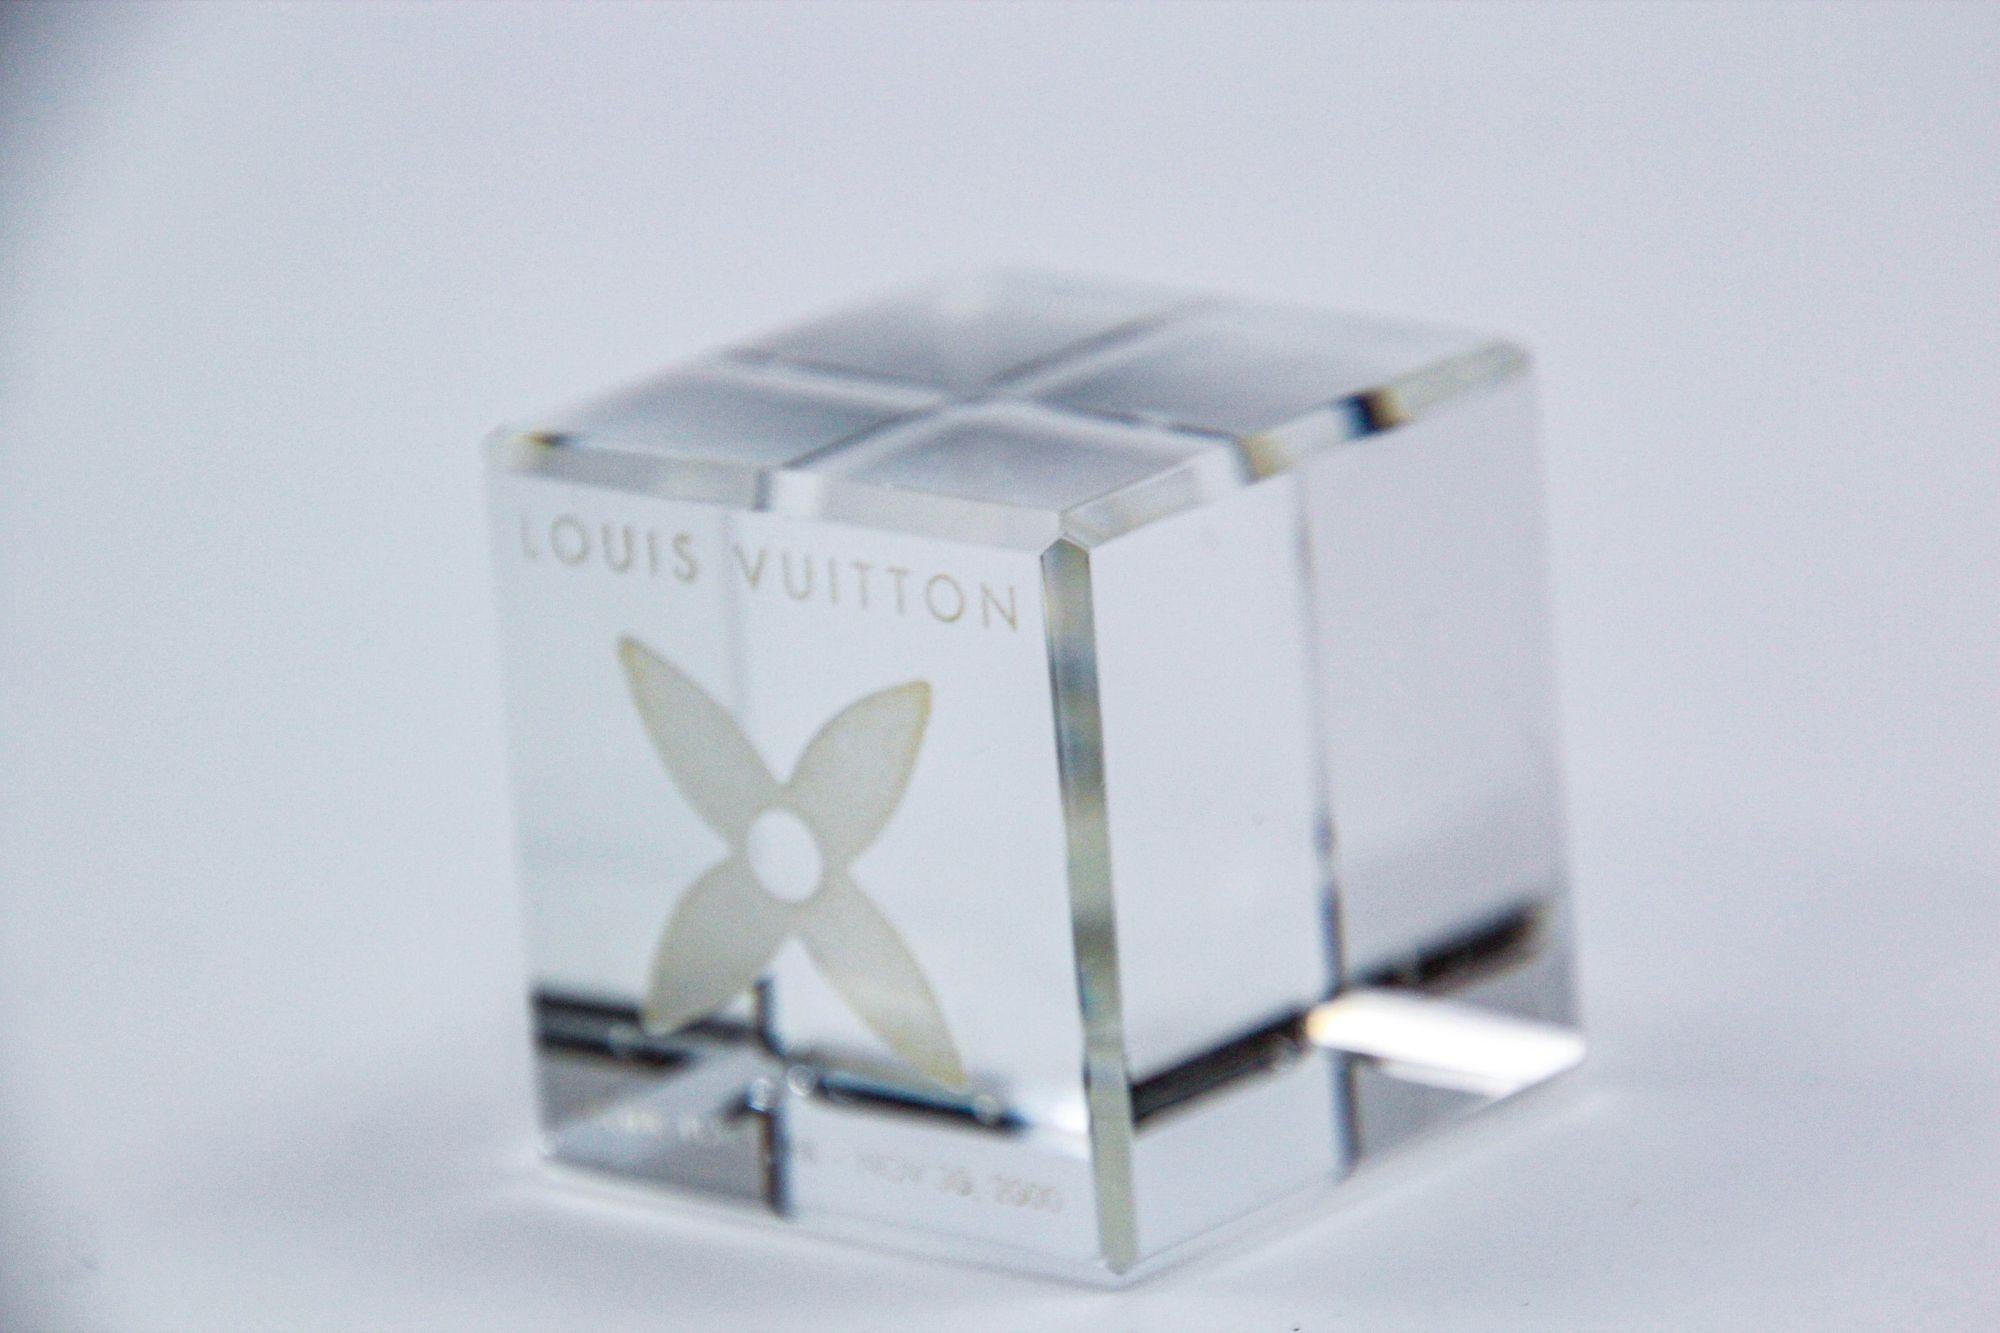 LOUIS VUITTON Cube Paperweight LOUIS VUITTON Monogram Crystal Paper Weight For Sale 2